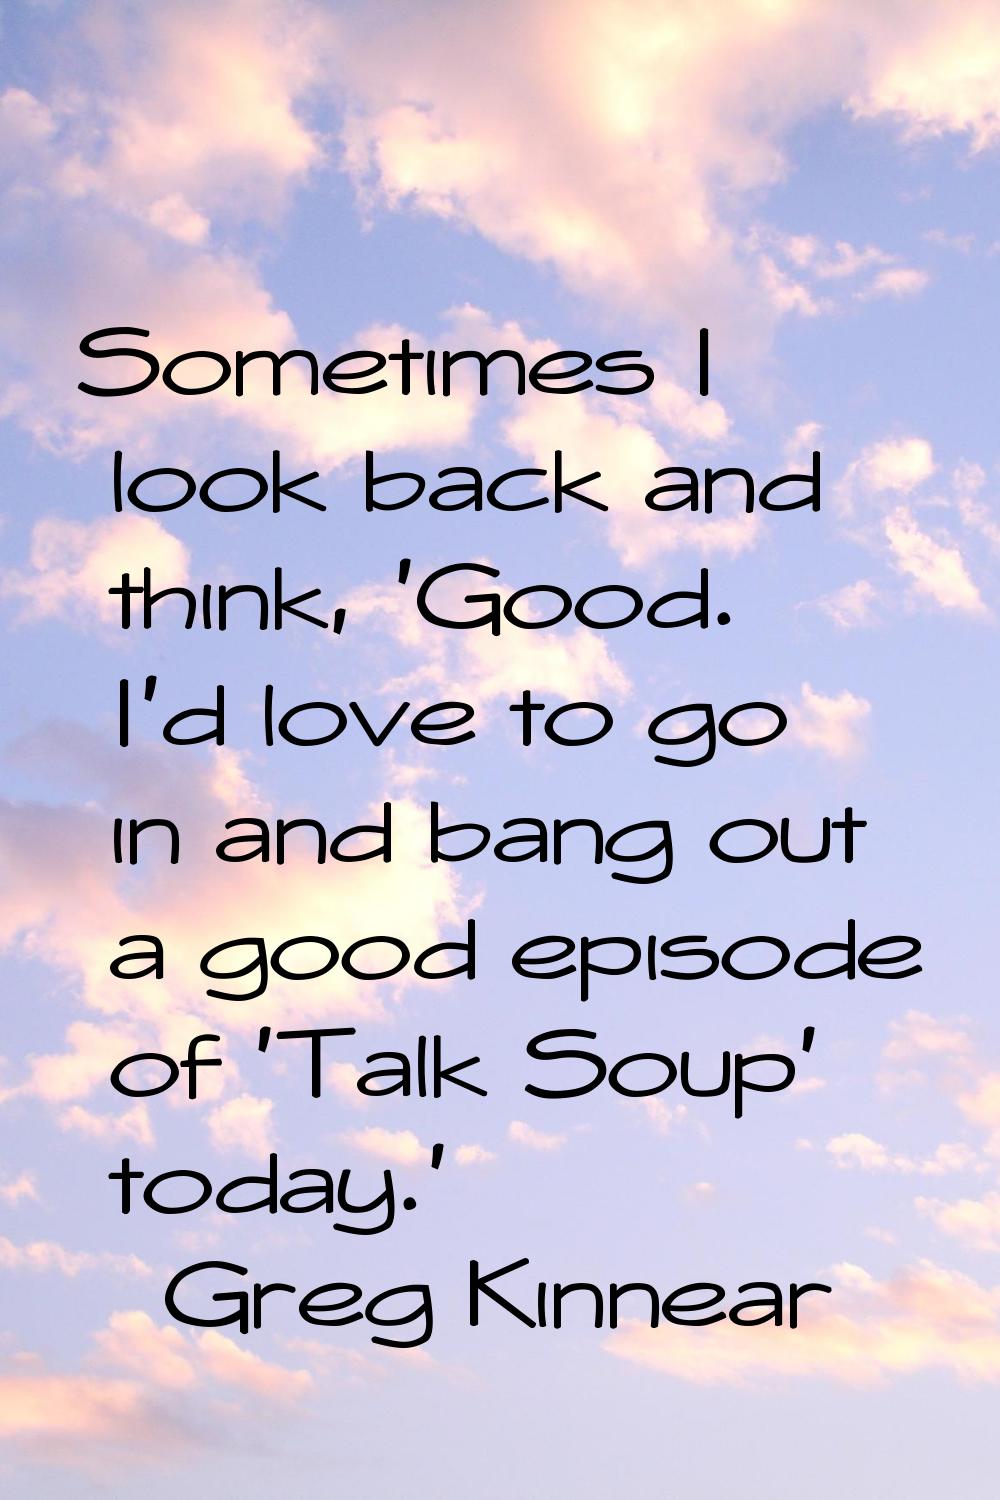 Sometimes I look back and think, 'Good. I'd love to go in and bang out a good episode of 'Talk Soup